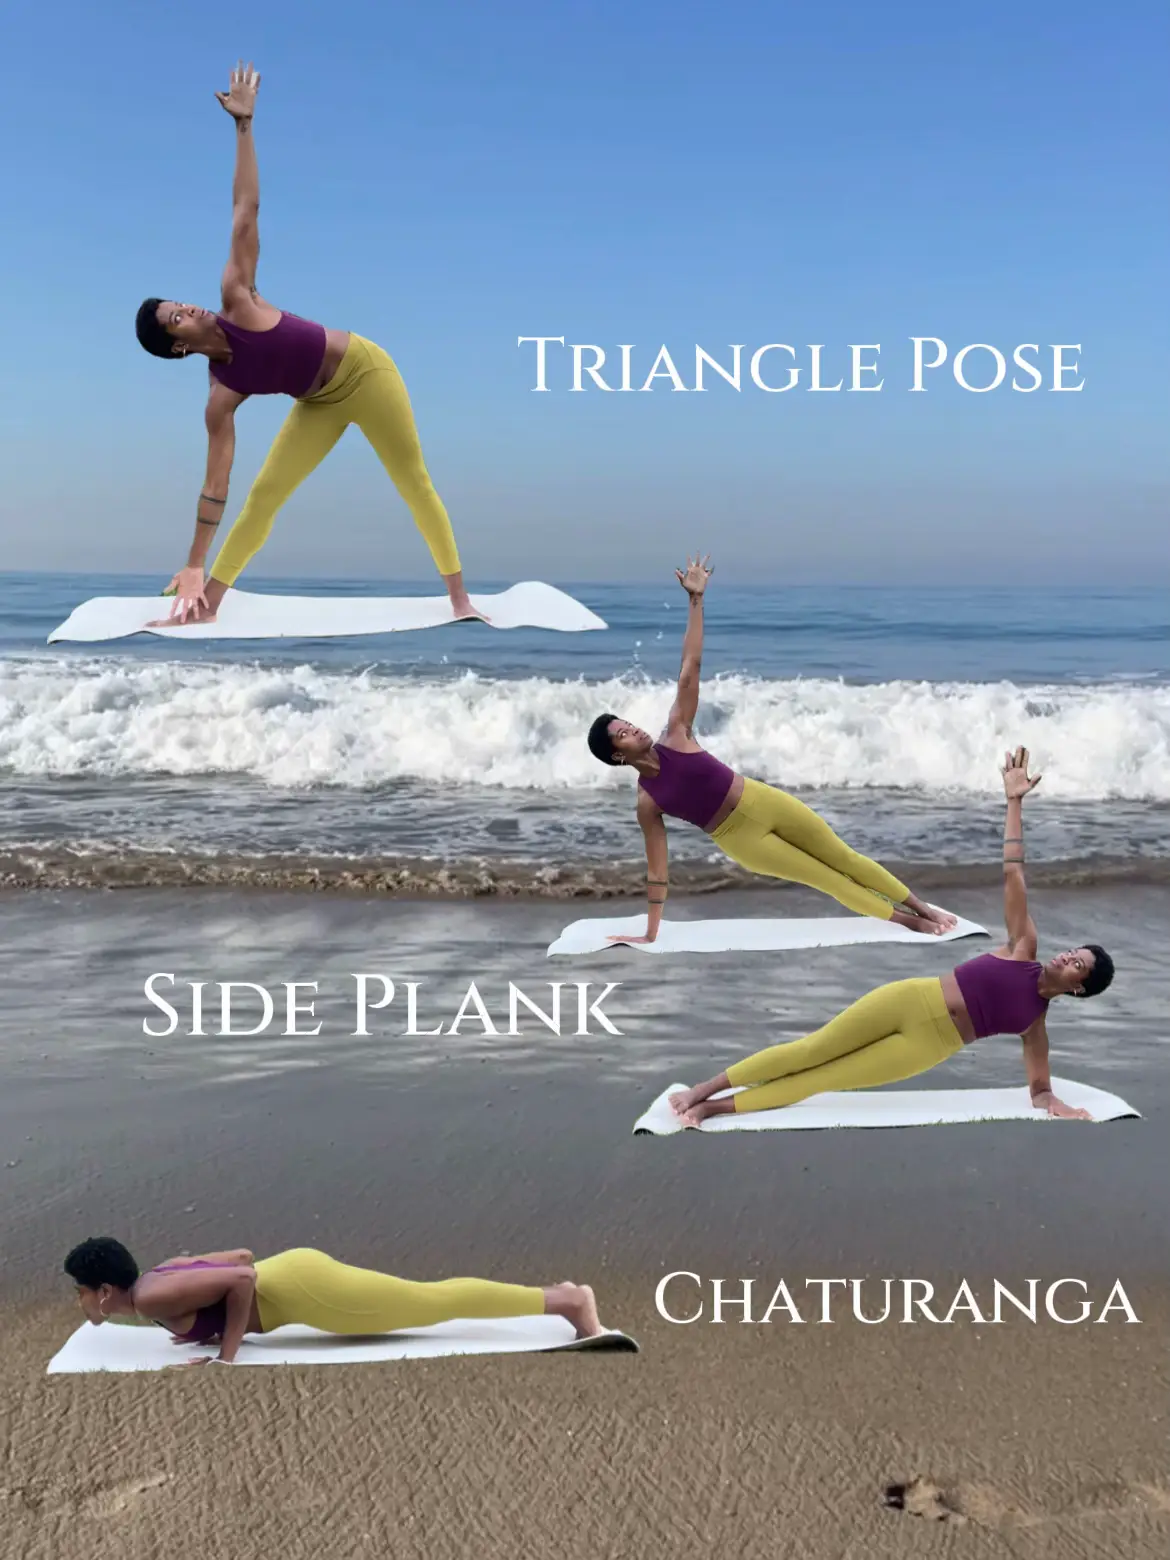 Meet Chaturanga: the Hows and Whys of Our Yoga Pose of the Month